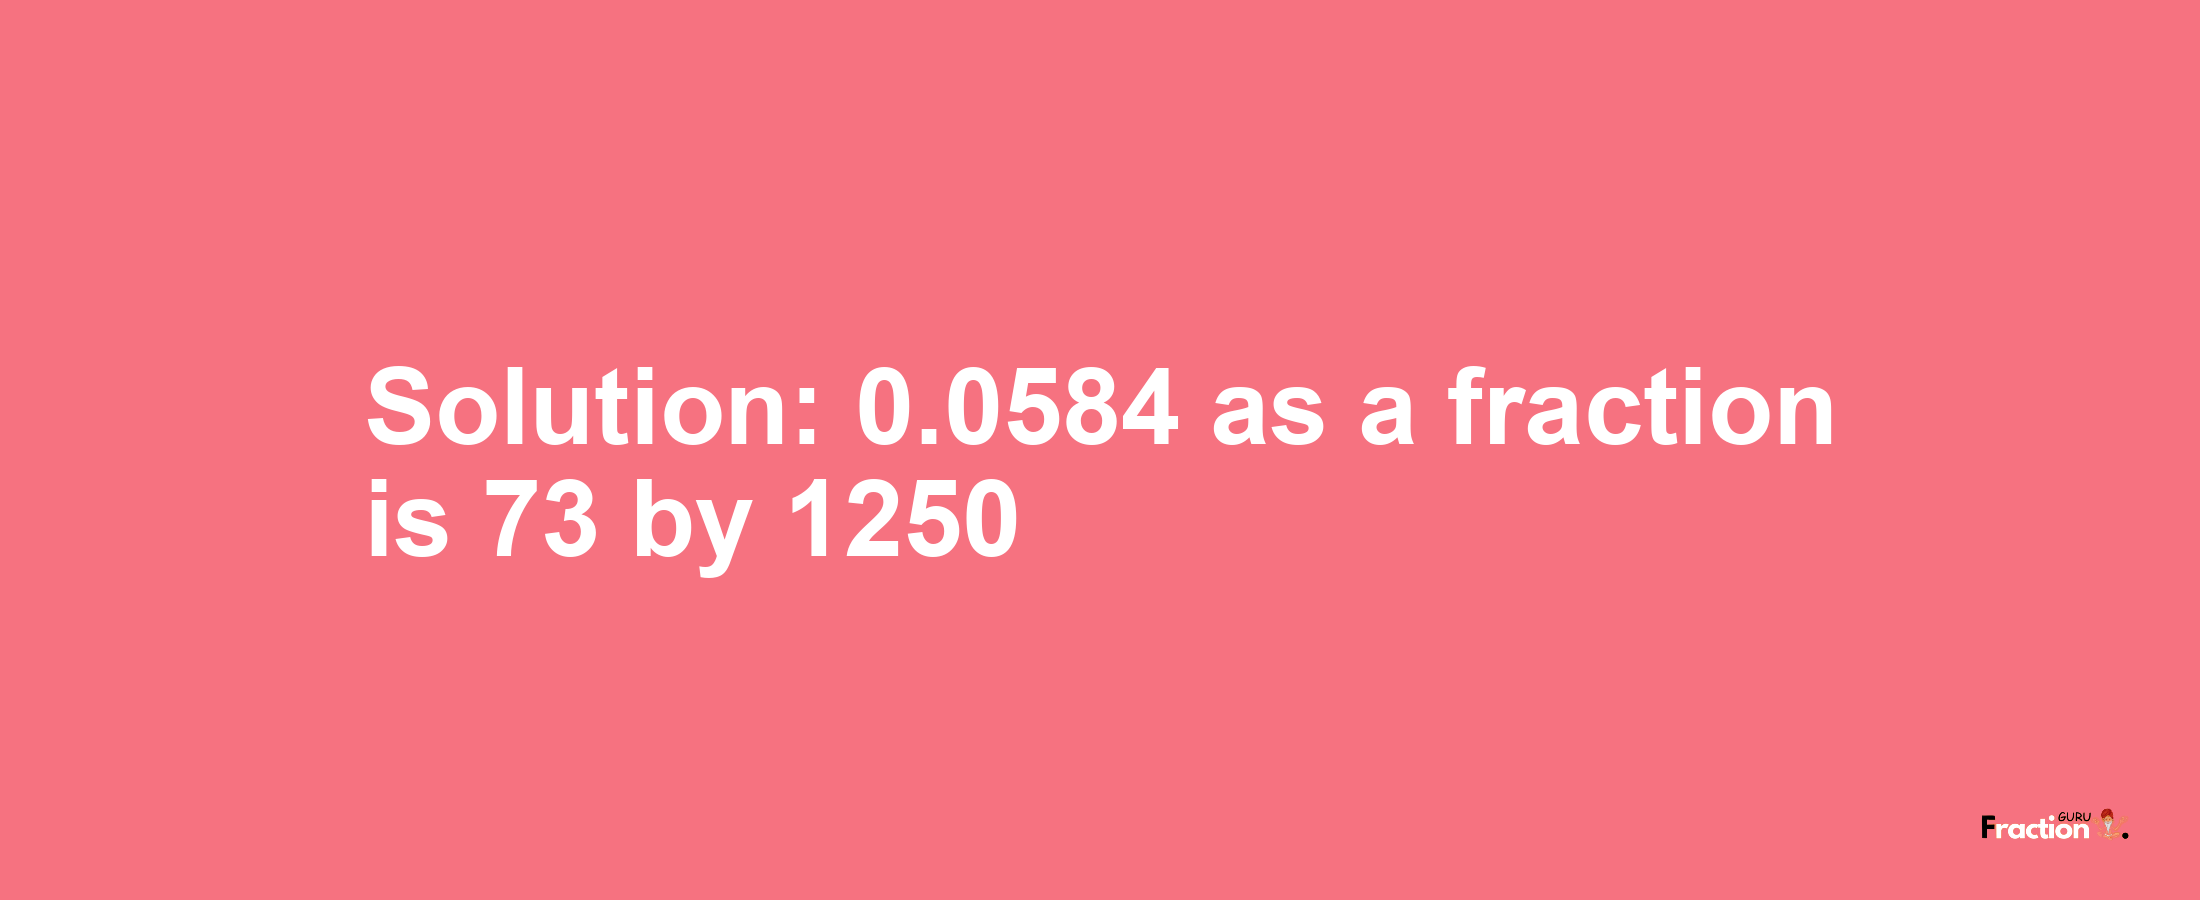 Solution:0.0584 as a fraction is 73/1250